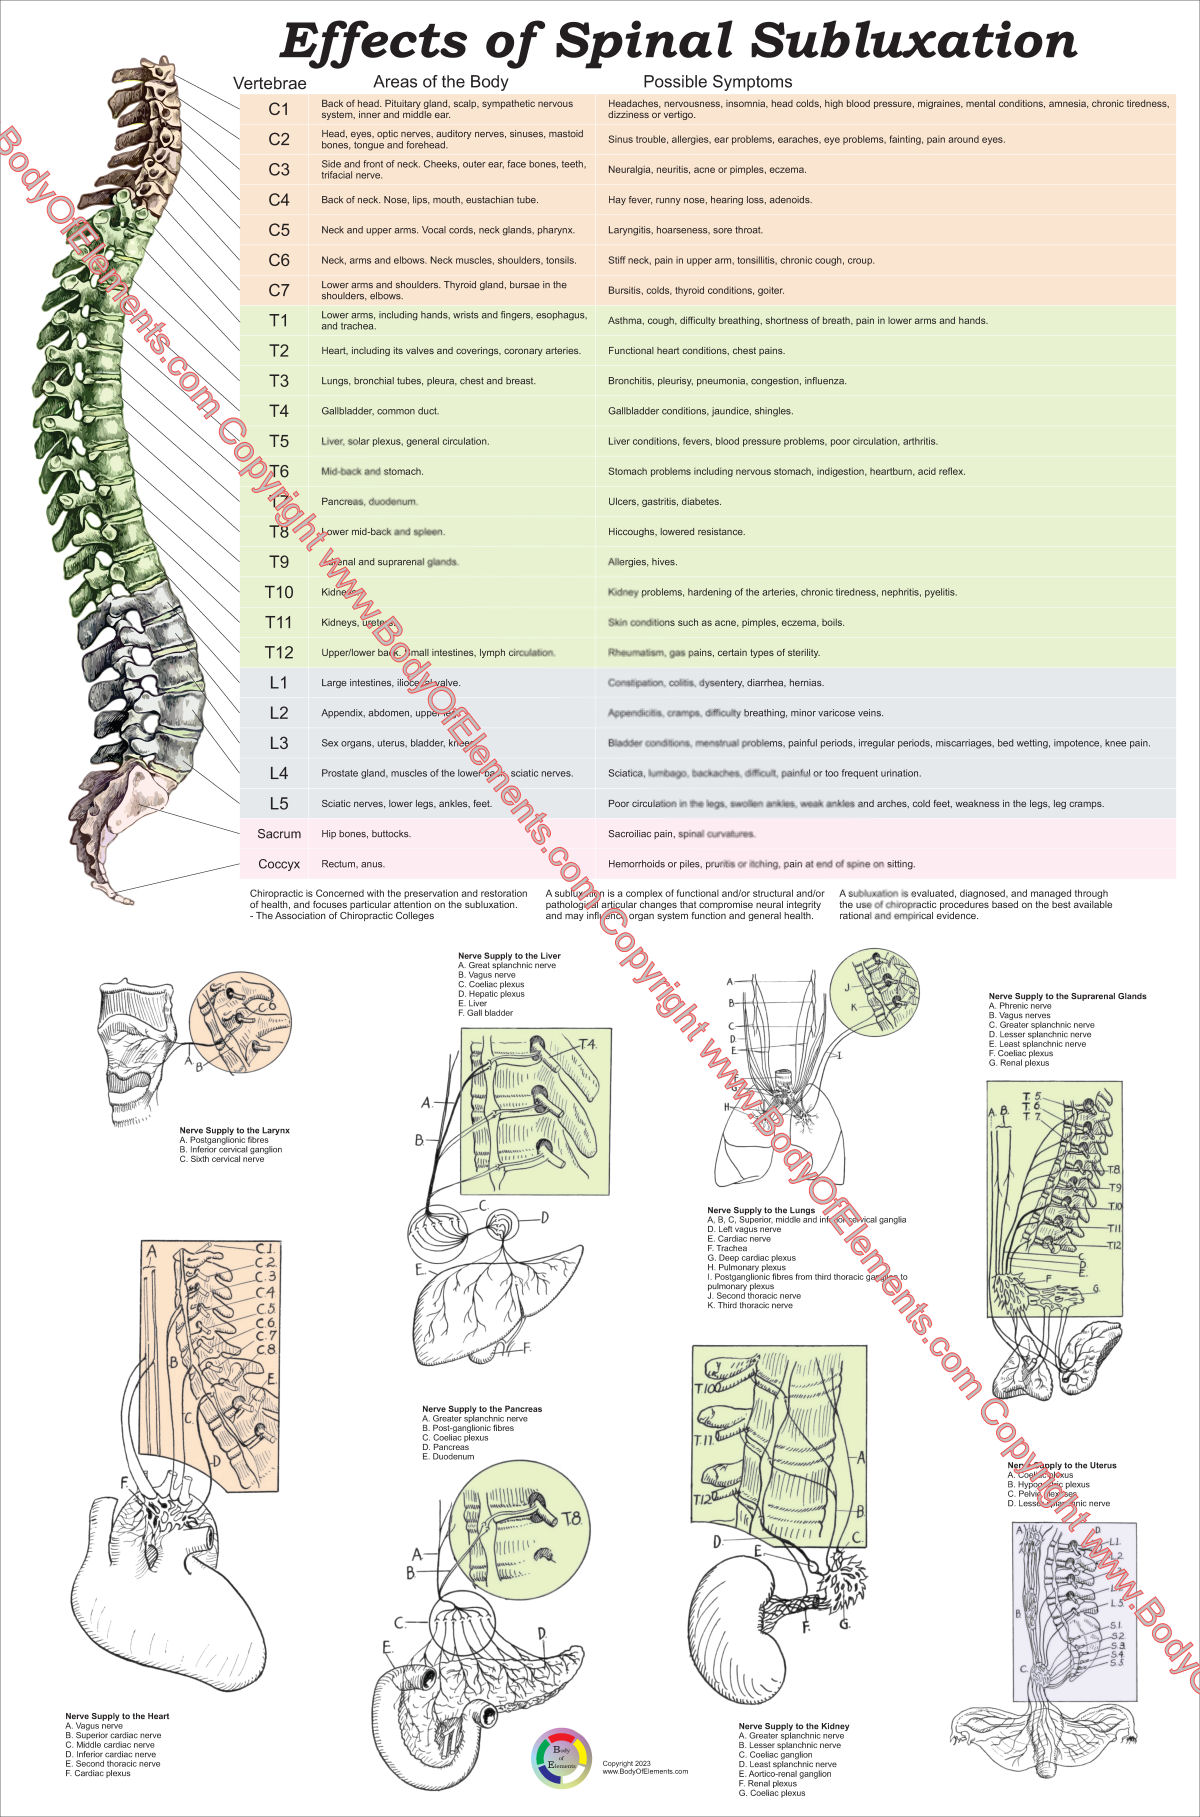 Effects of Spinal Subluxation Poster